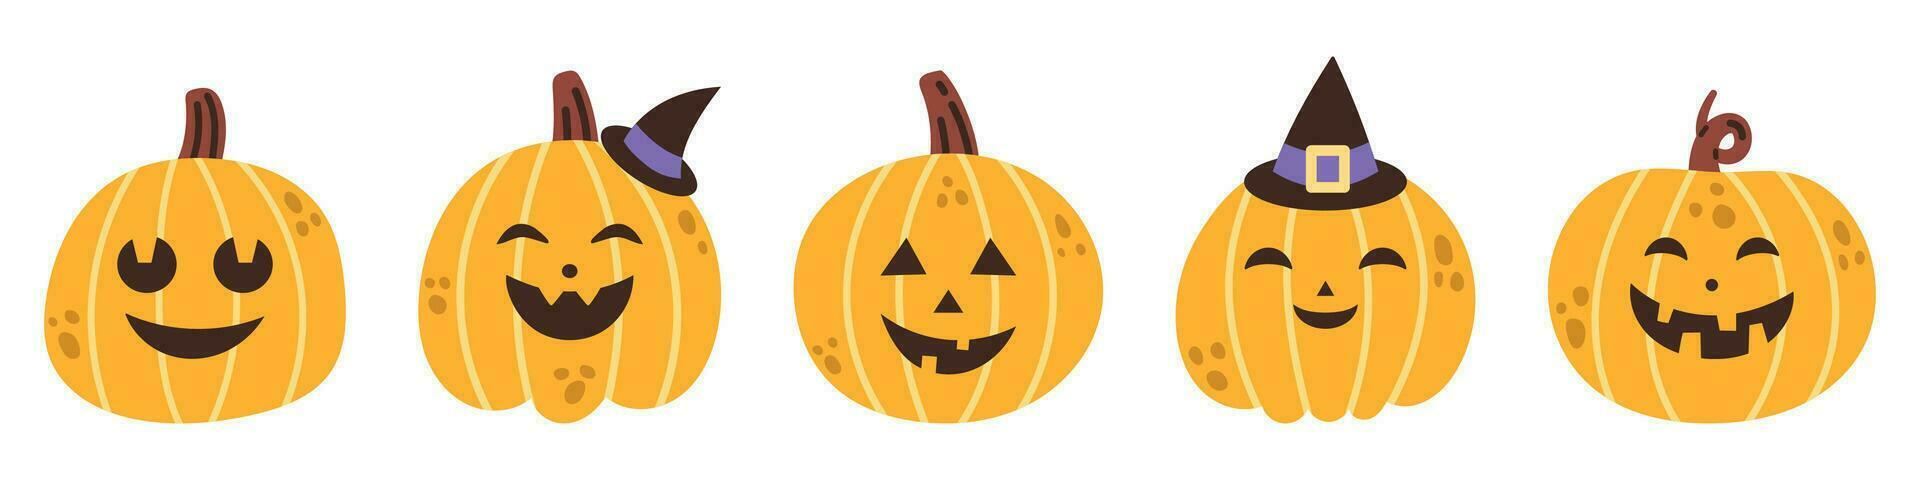 Vector halloween pumpkin set. Collection of halloween pumpkins in witch hats in flat design. Scary and spooky faces. Jack o lantern. Funny smiling pumpkins for halloween night.